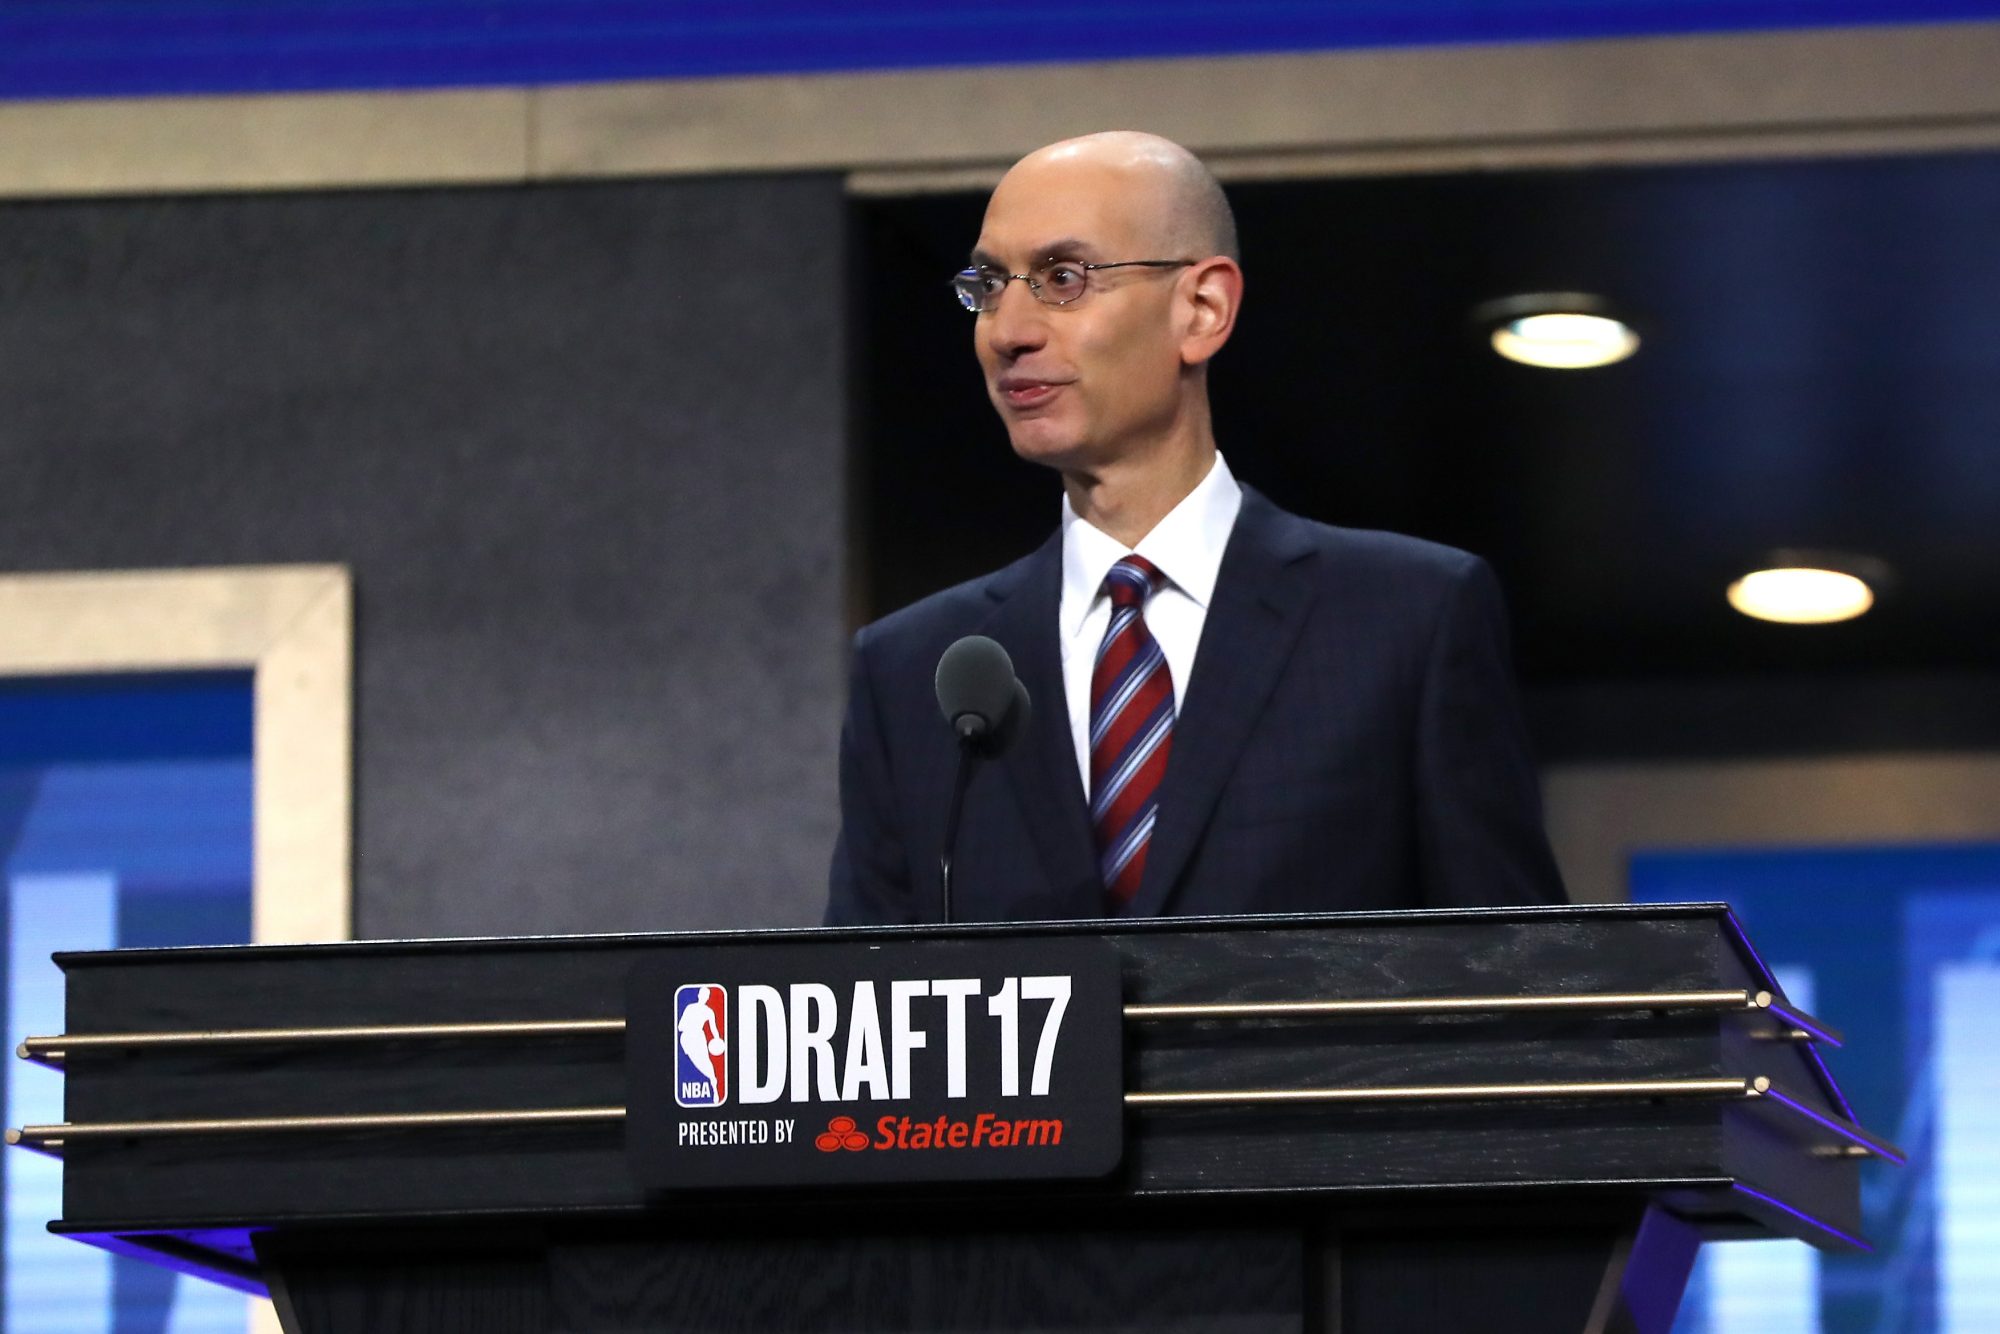 NEW YORK, NY - JUNE 22: NBA Commissioner Adam Silver speaks during the first round of the 2017 NBA Draft at Barclays Center on June 22, 2017 in New York City. NOTE TO USER: User expressly acknowledges and agrees that, by downloading and or using this photograph, User is consenting to the terms and conditions of the Getty Images License Agreement.